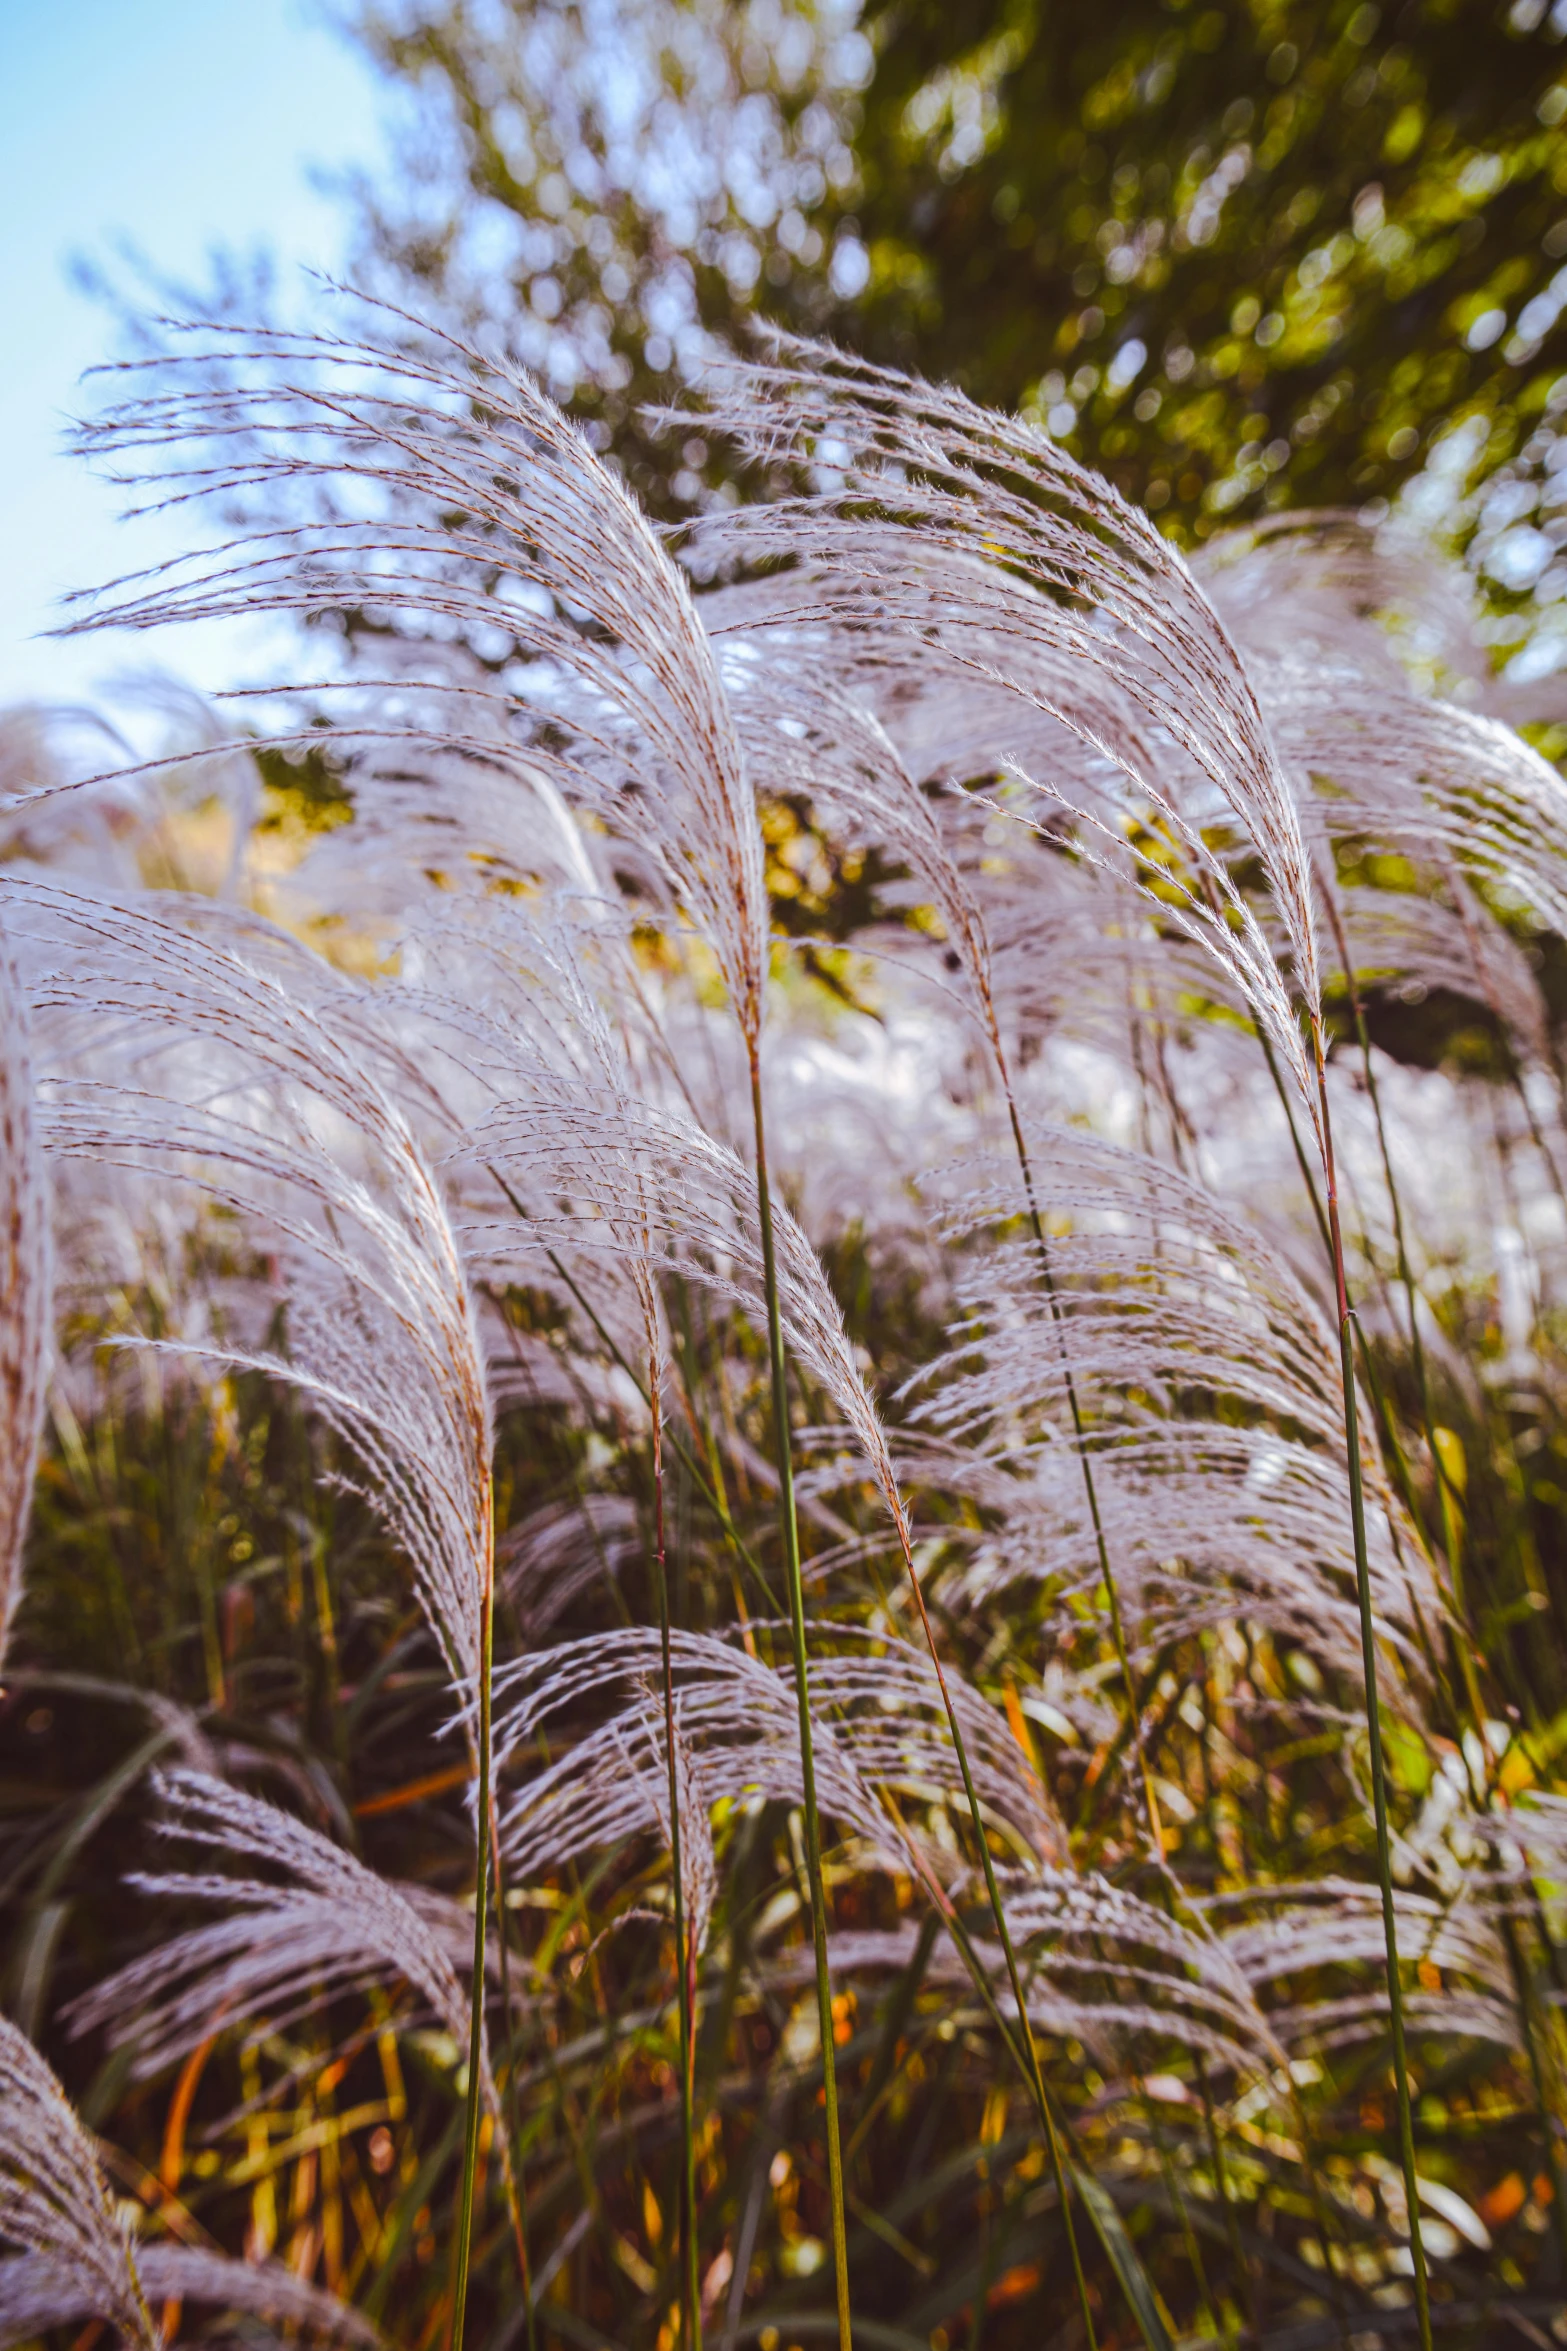 closeup image of reeds in the grass with some very low lying white reeds in the foreground